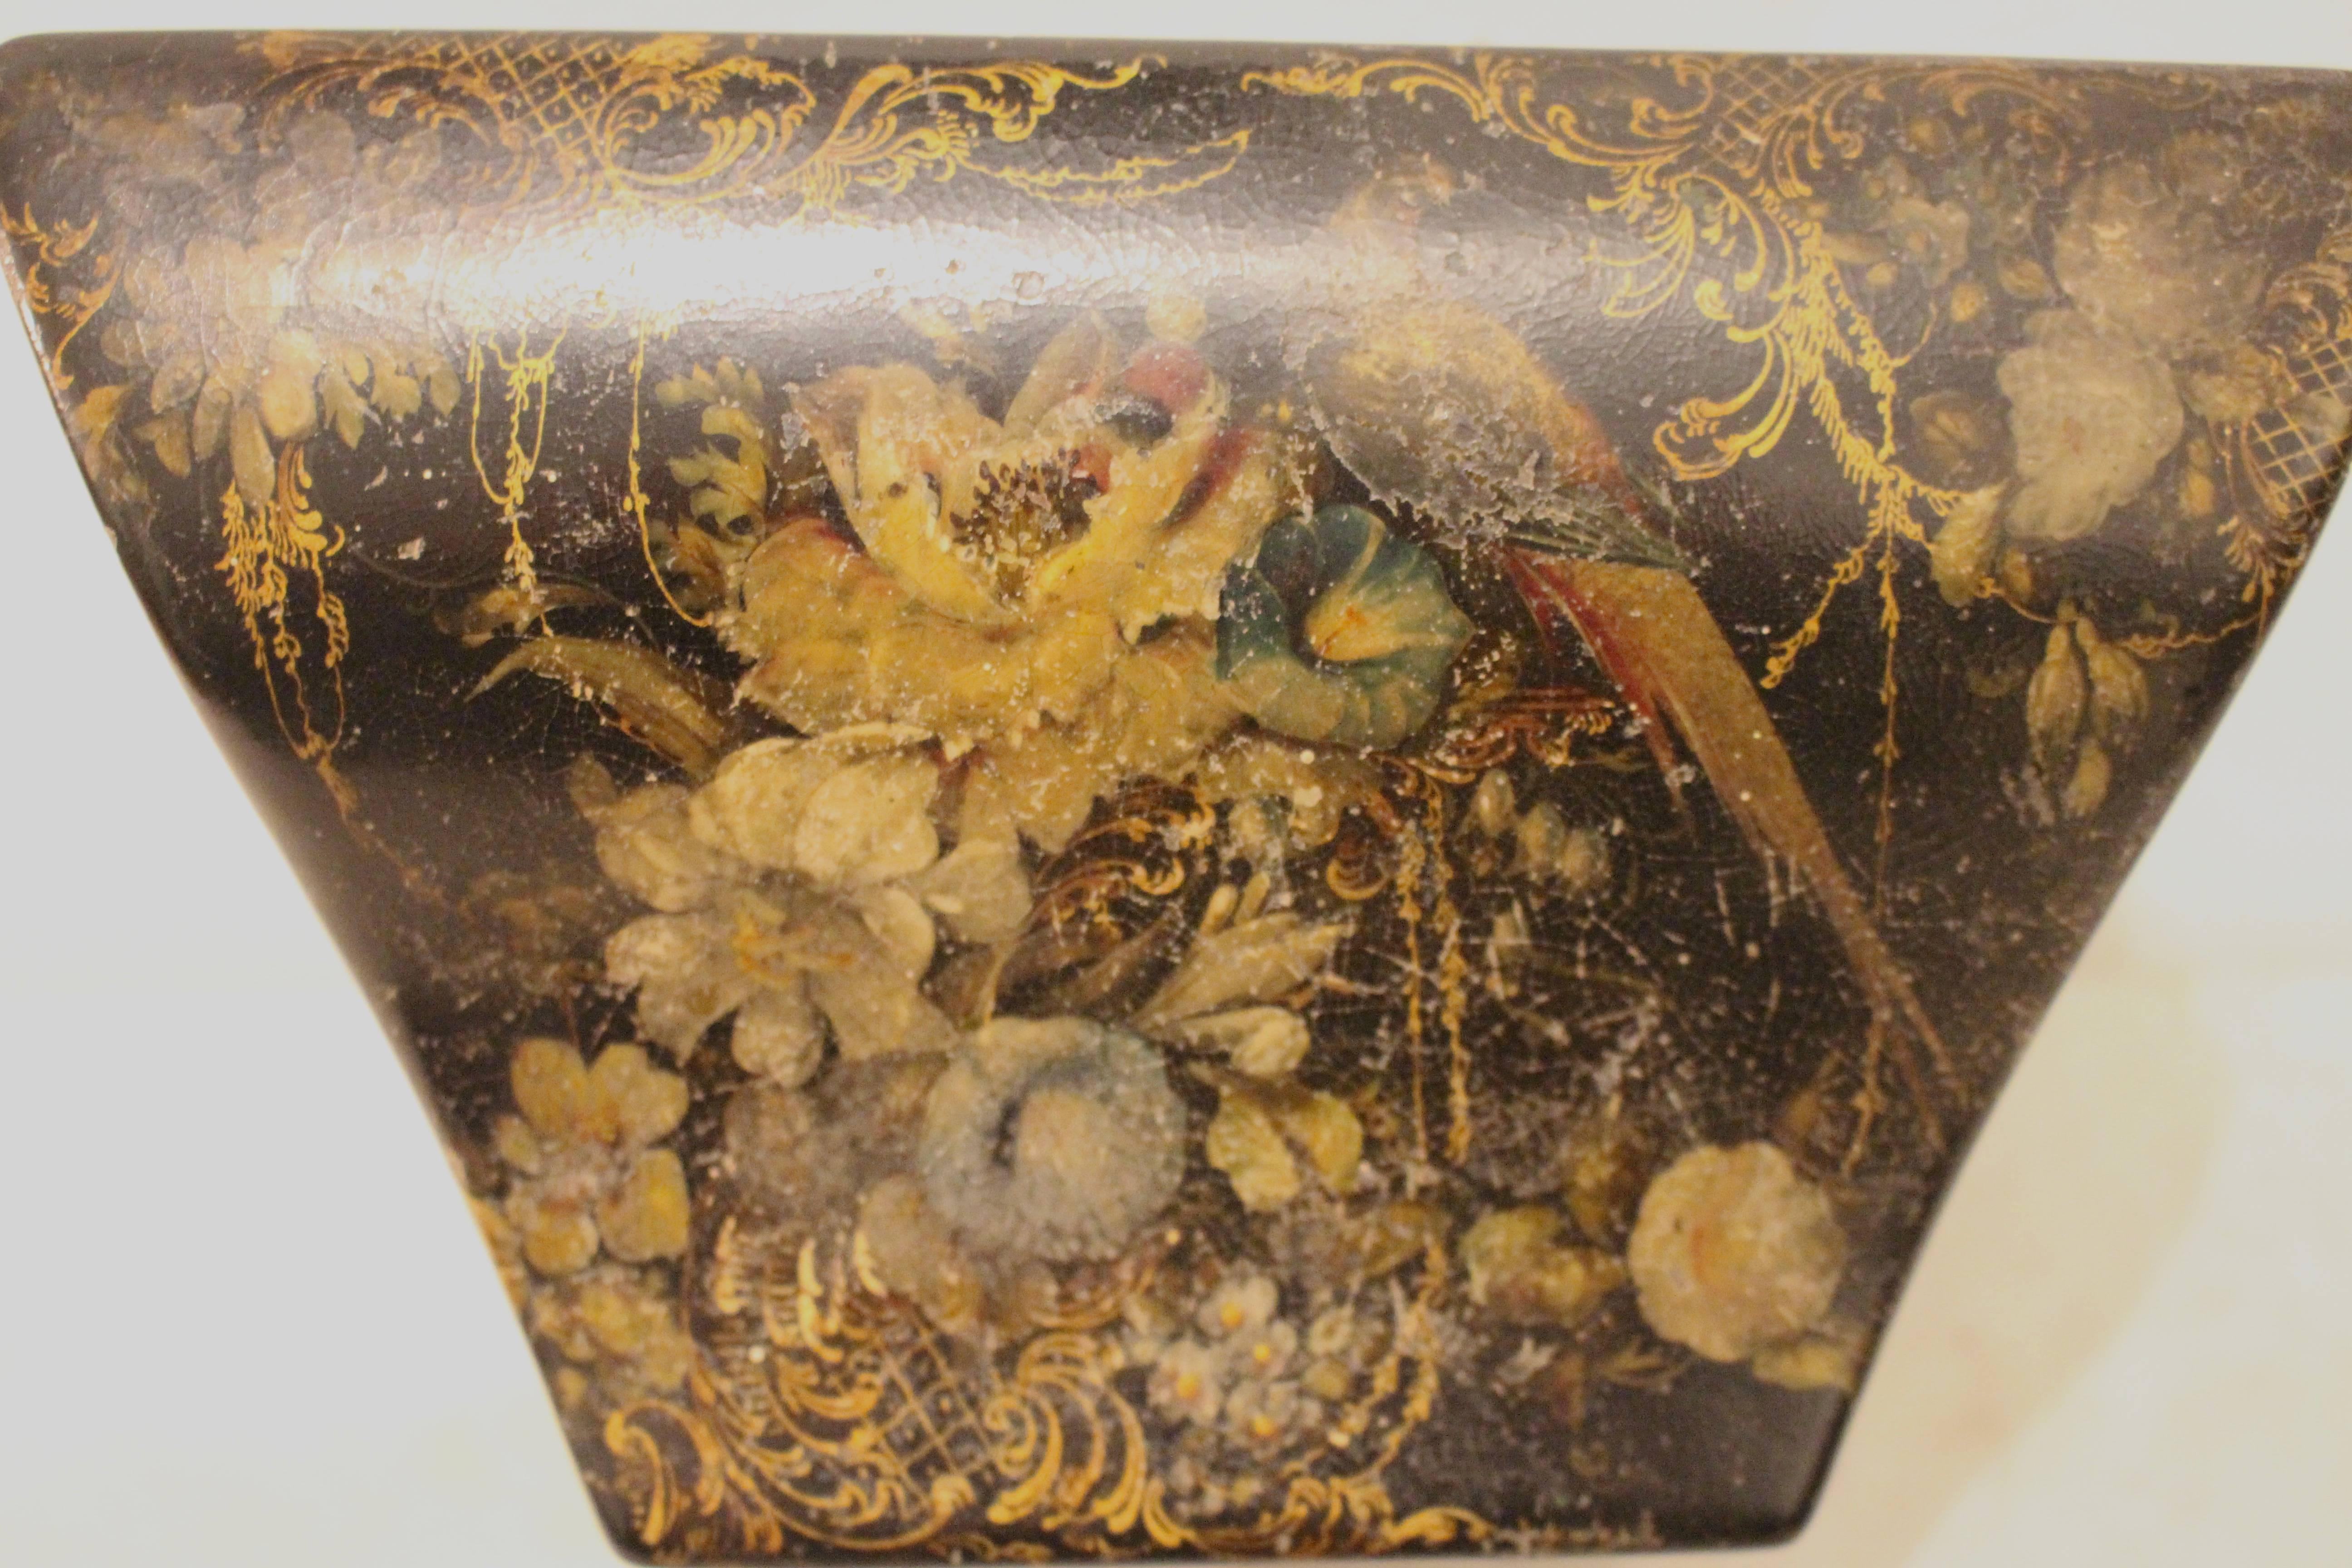 Paper Victorian Papier-Mache Stationary Box With Painted, Gilded Birds and Flowers